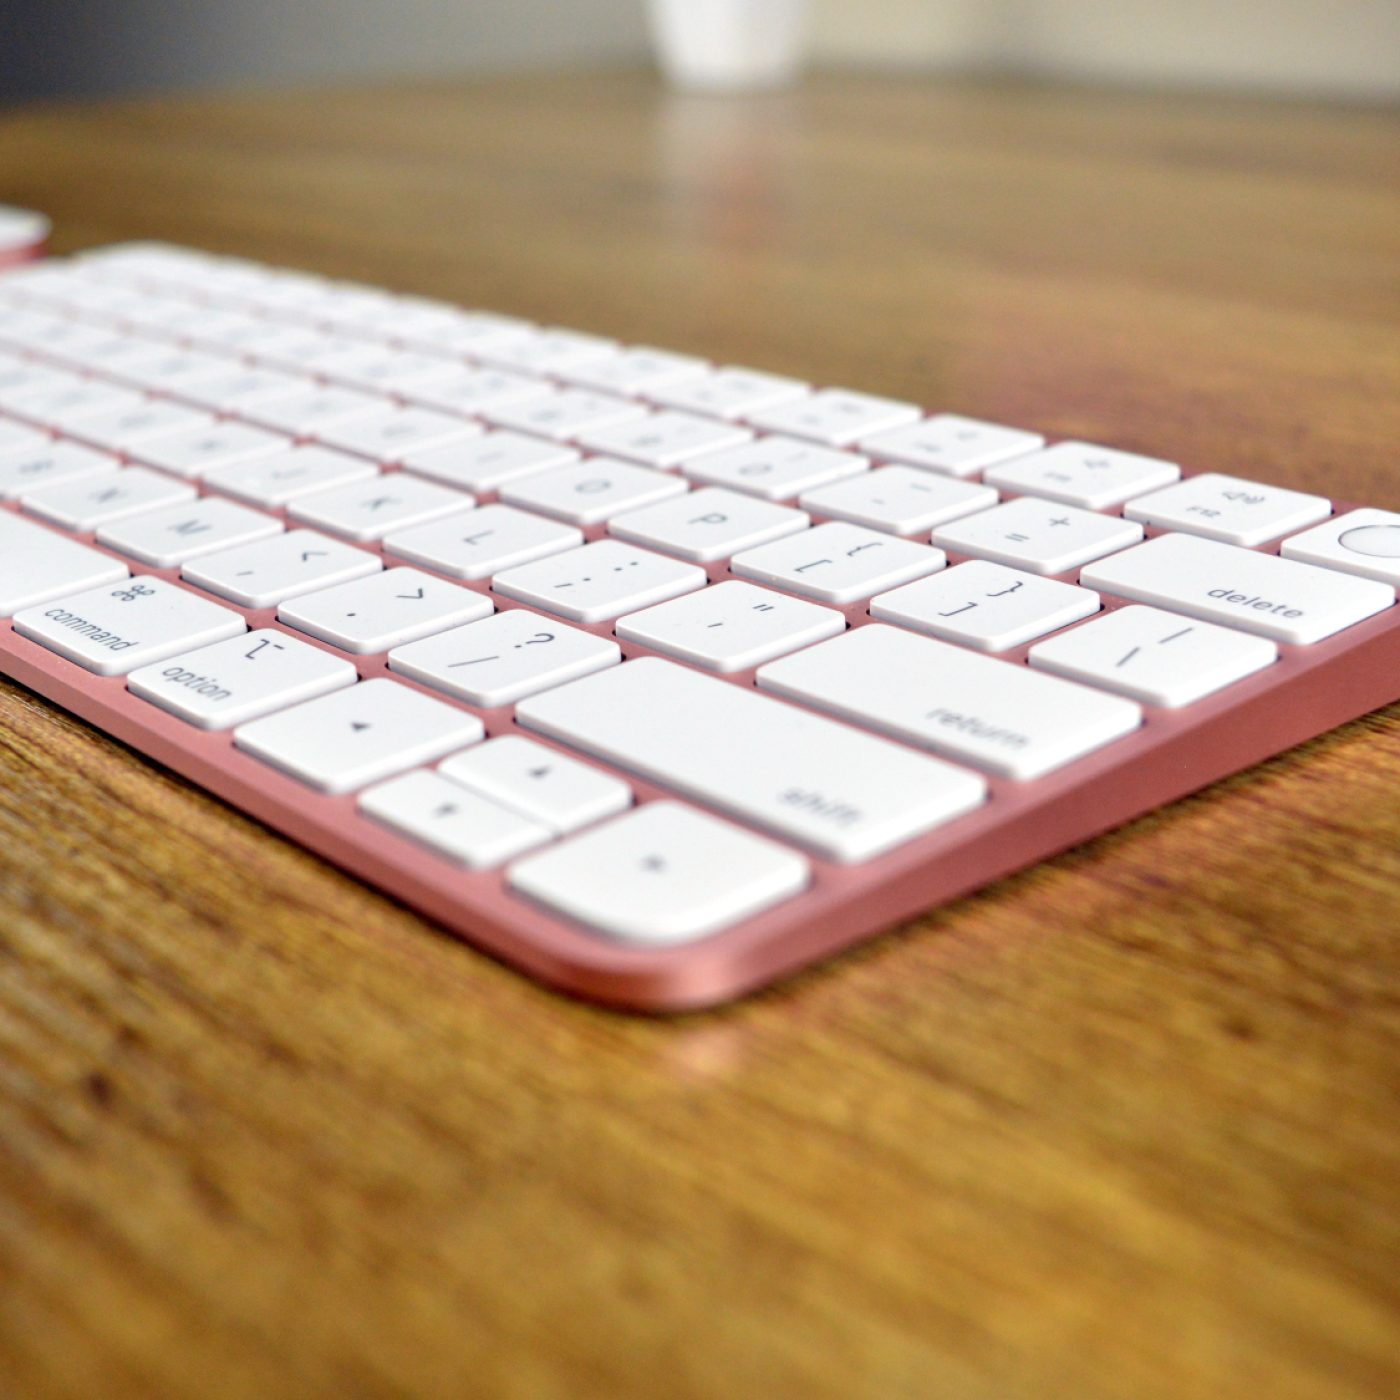 Updated Magic Keyboard, Trackpad, and Mouse might launch soon